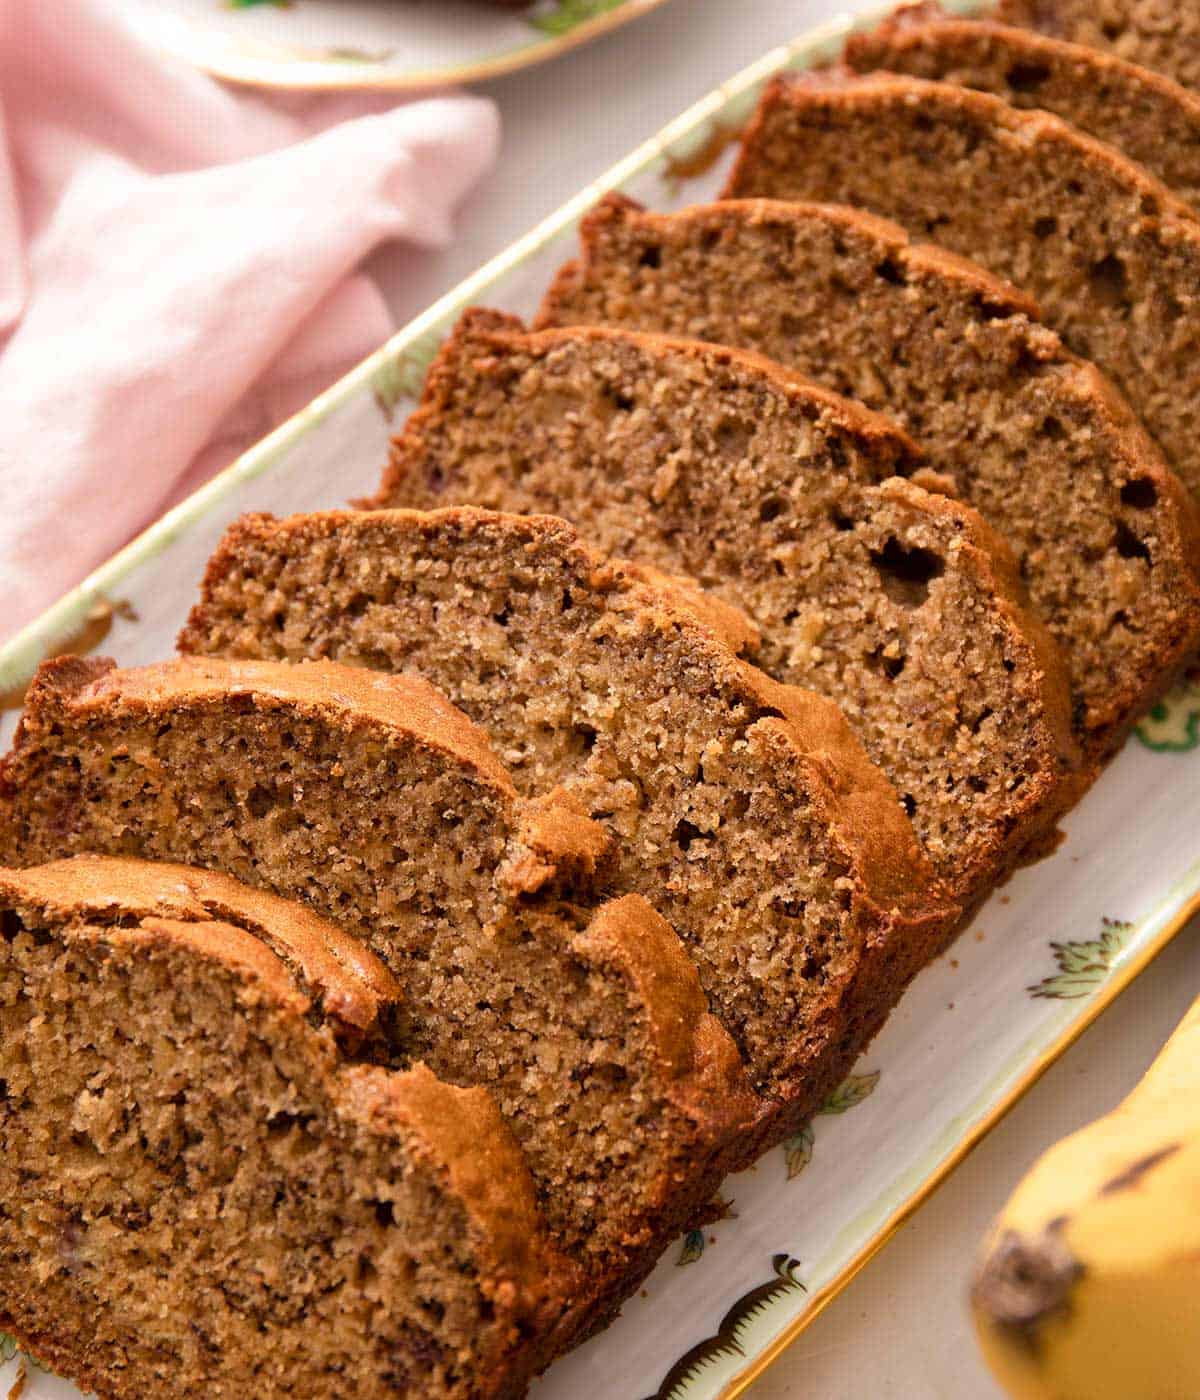 Banana bread cut into slices on a serving plate